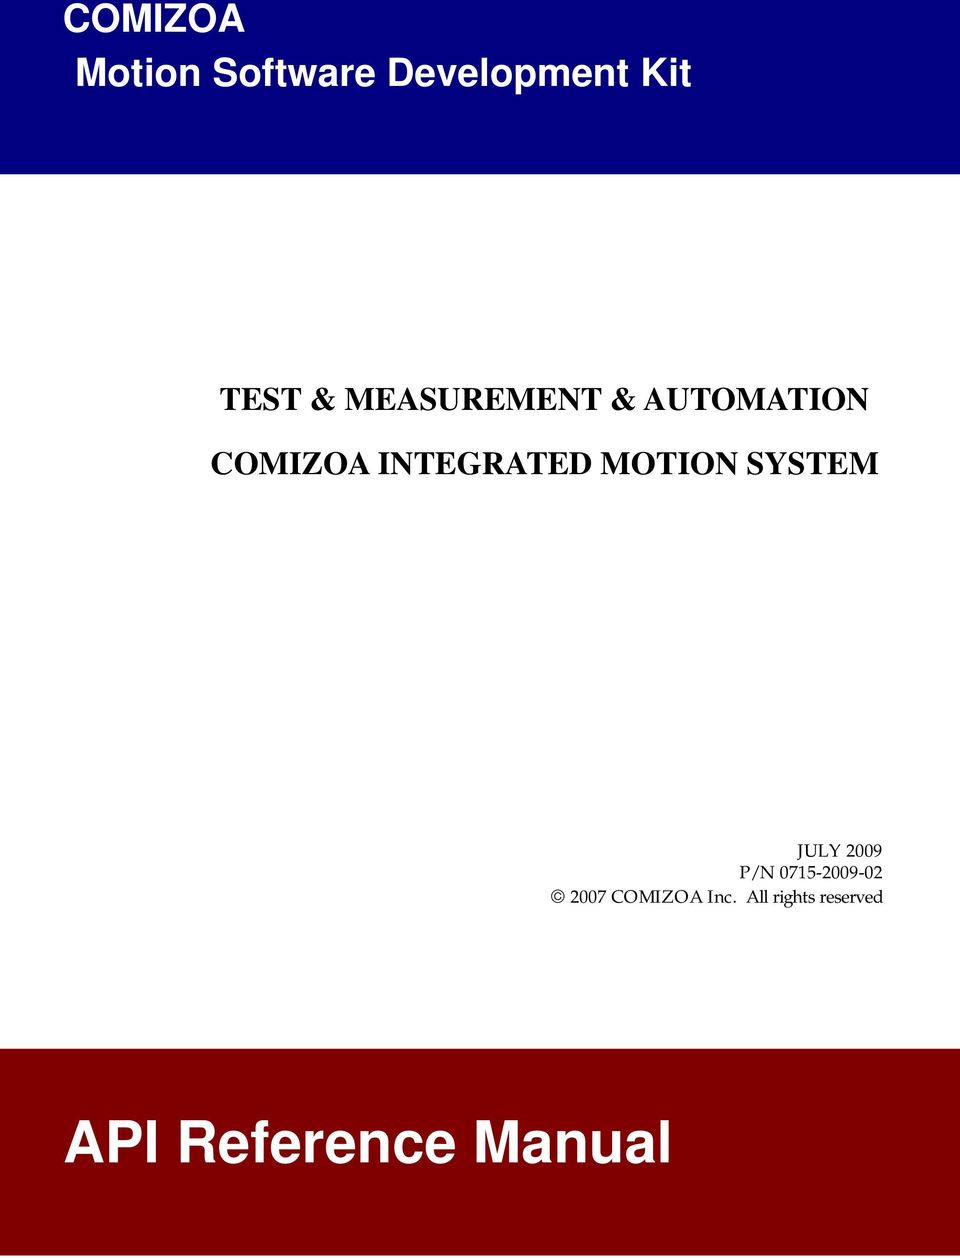 COMIZOA INTEGRATED MOTION SYSTEM JULY 2009 P/N